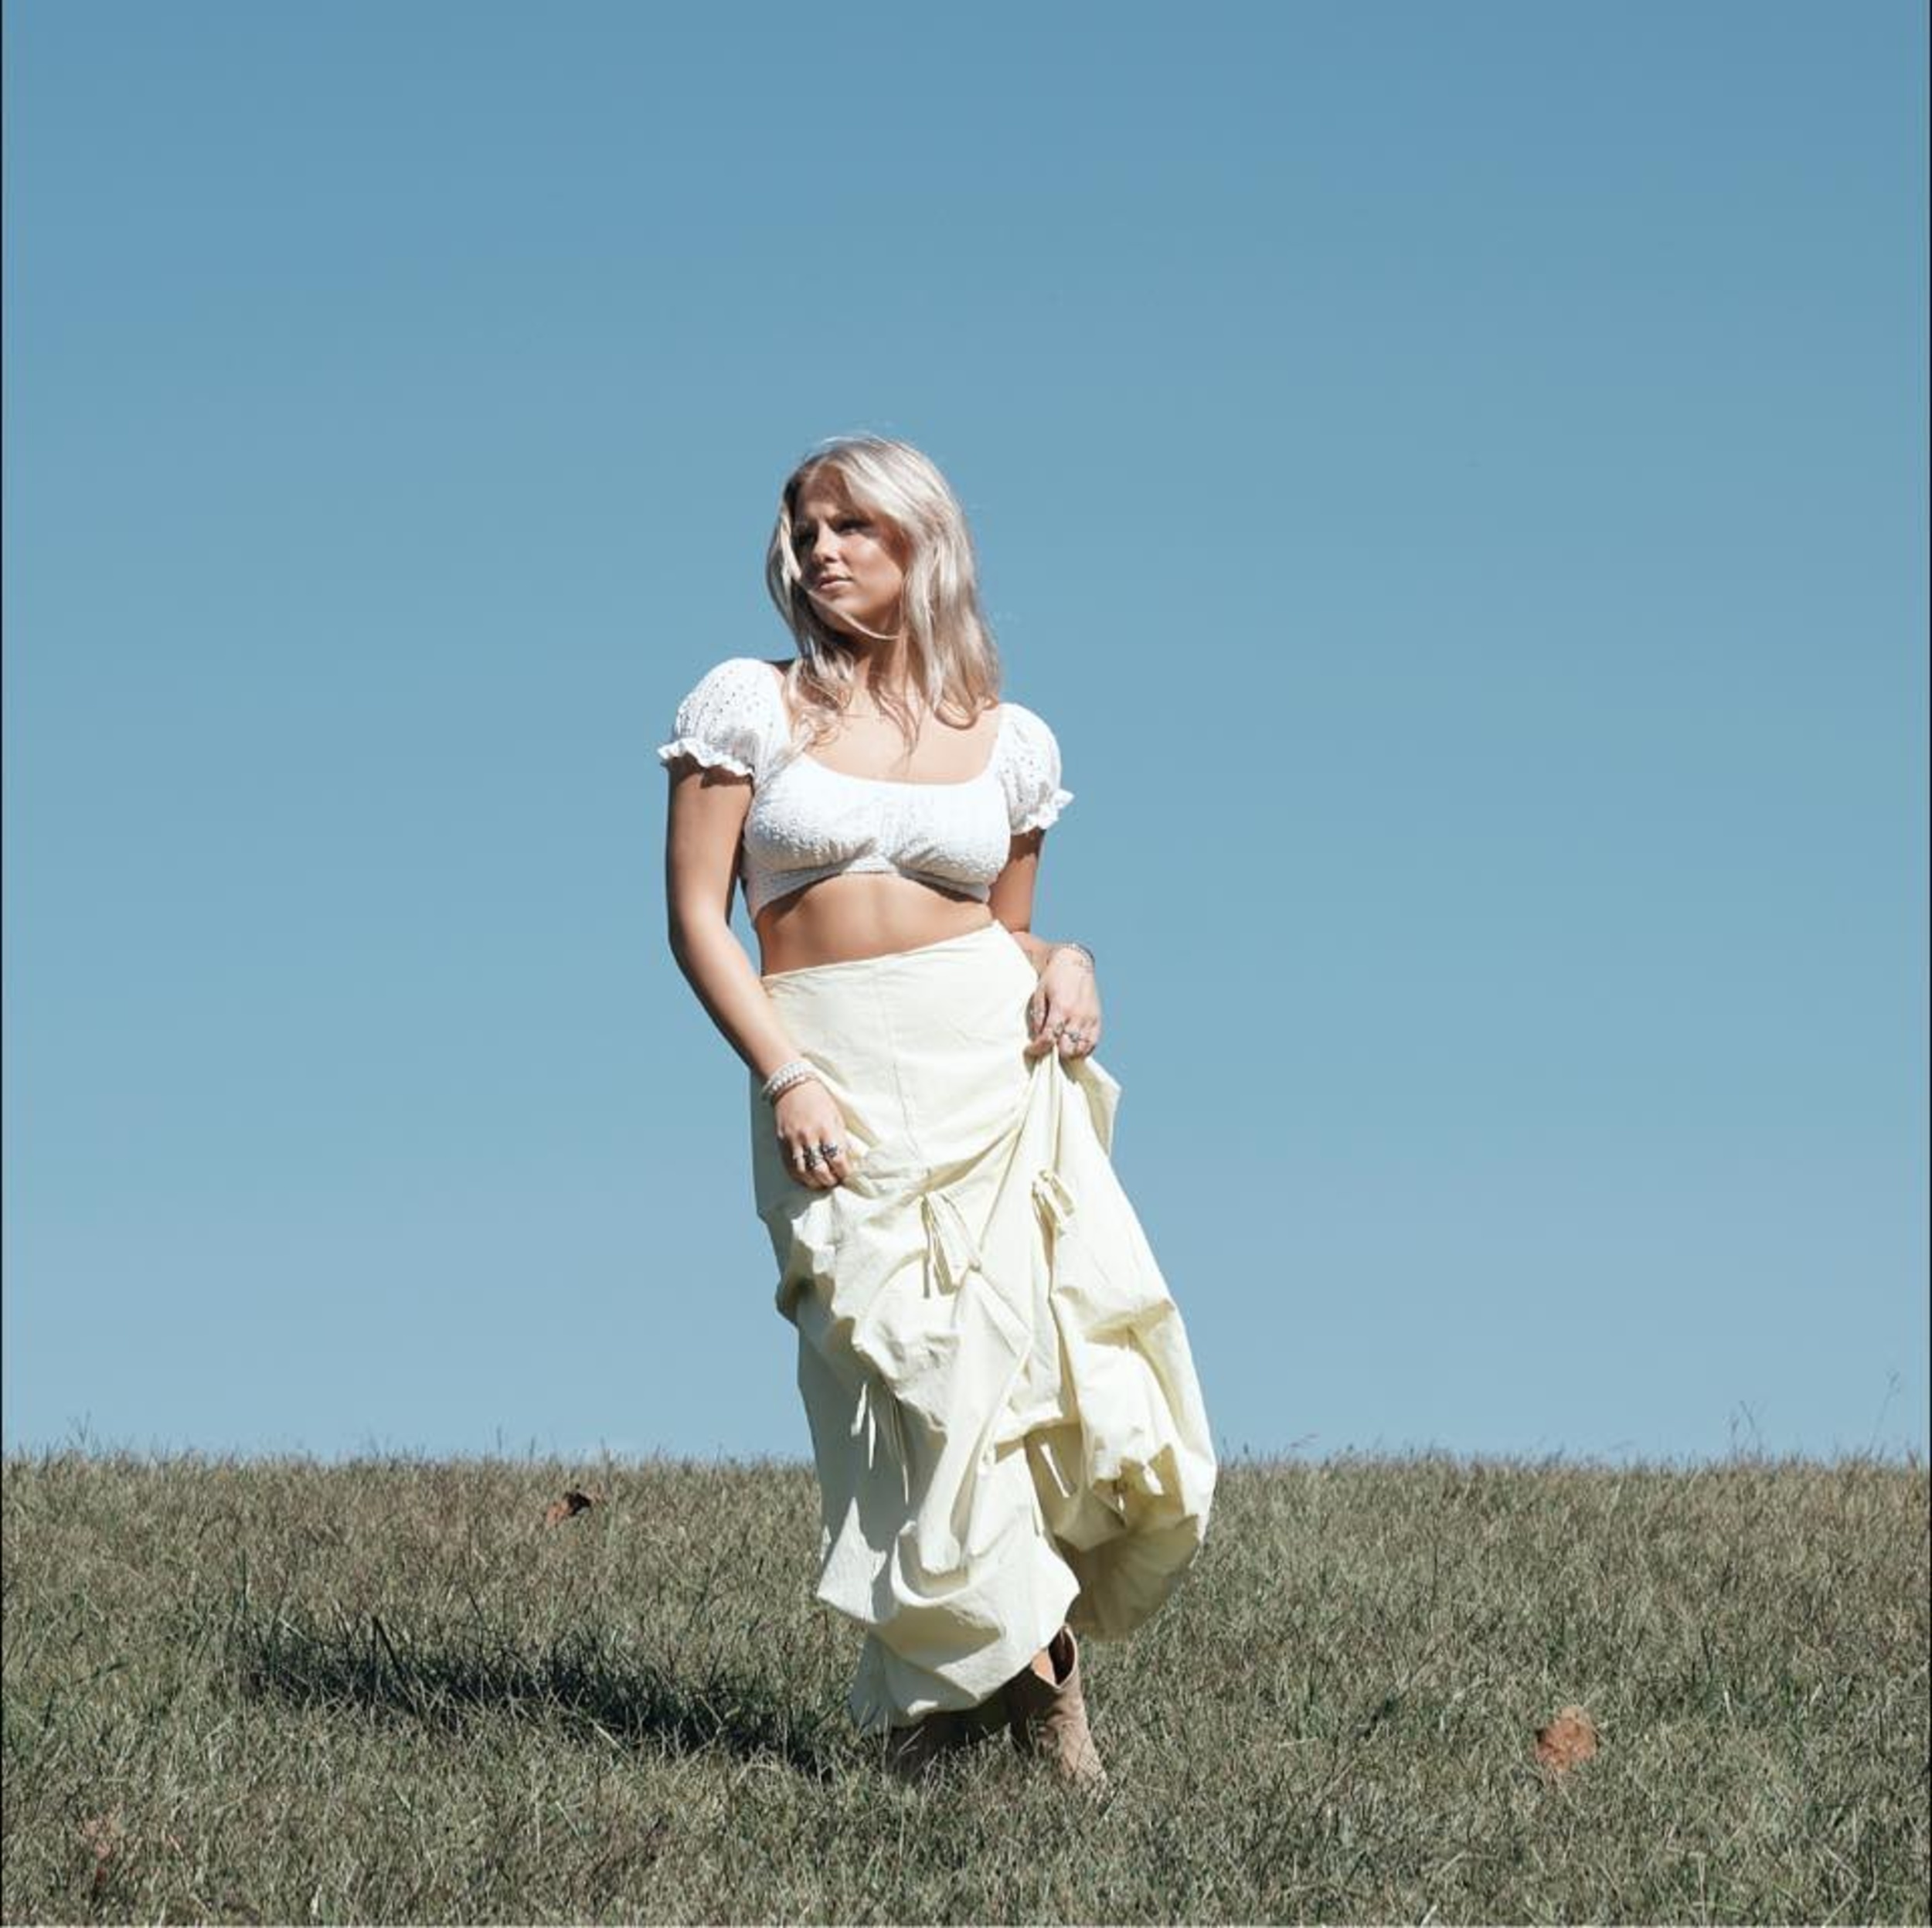 <p>At just 19 years old, singer-songwriter Ashley Anne writes heartfelt, emotion-drenched lyrics that are wise beyond her years. Just listen to "Dear Dolly," a tune addressed to the legend Dolly Parton herself, as proof. </p><p>You may also like: <a href='https://www.yardbarker.com/entertainment/articles/the_most_influential_movies_ever_made/s1__40276828'>The most influential movies ever made</a></p>